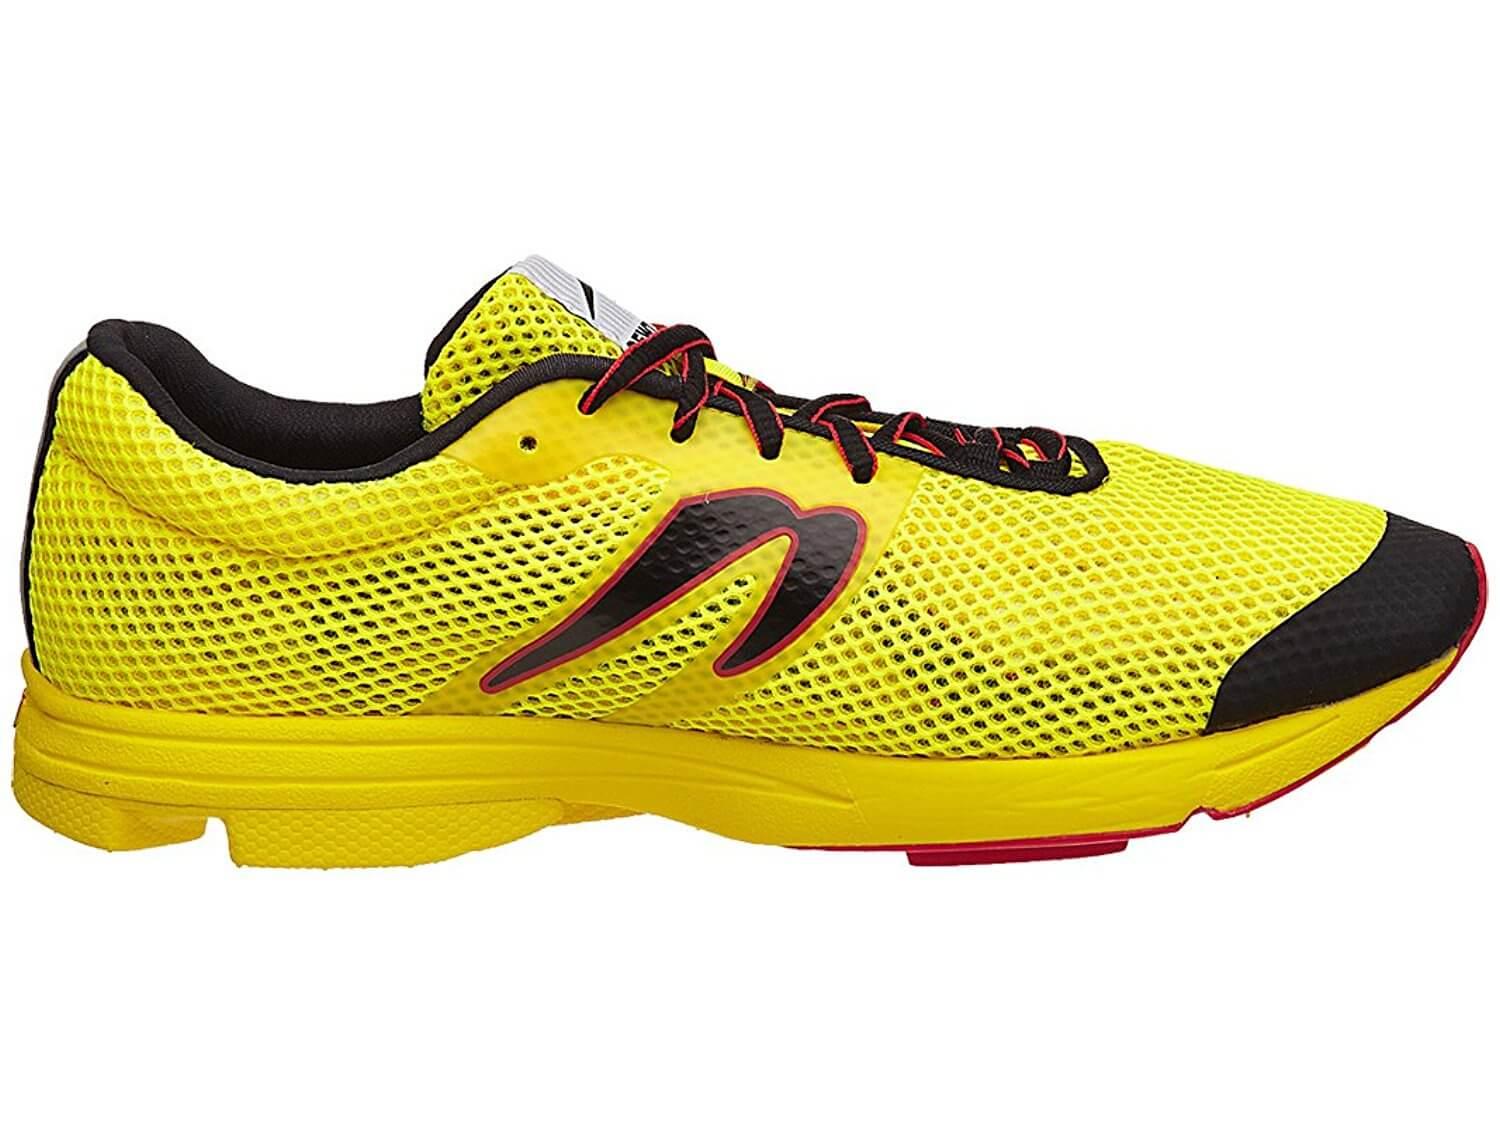 the Newton Distance Elite is a low-cut, low drop running shoe that features great surface control and ground feel